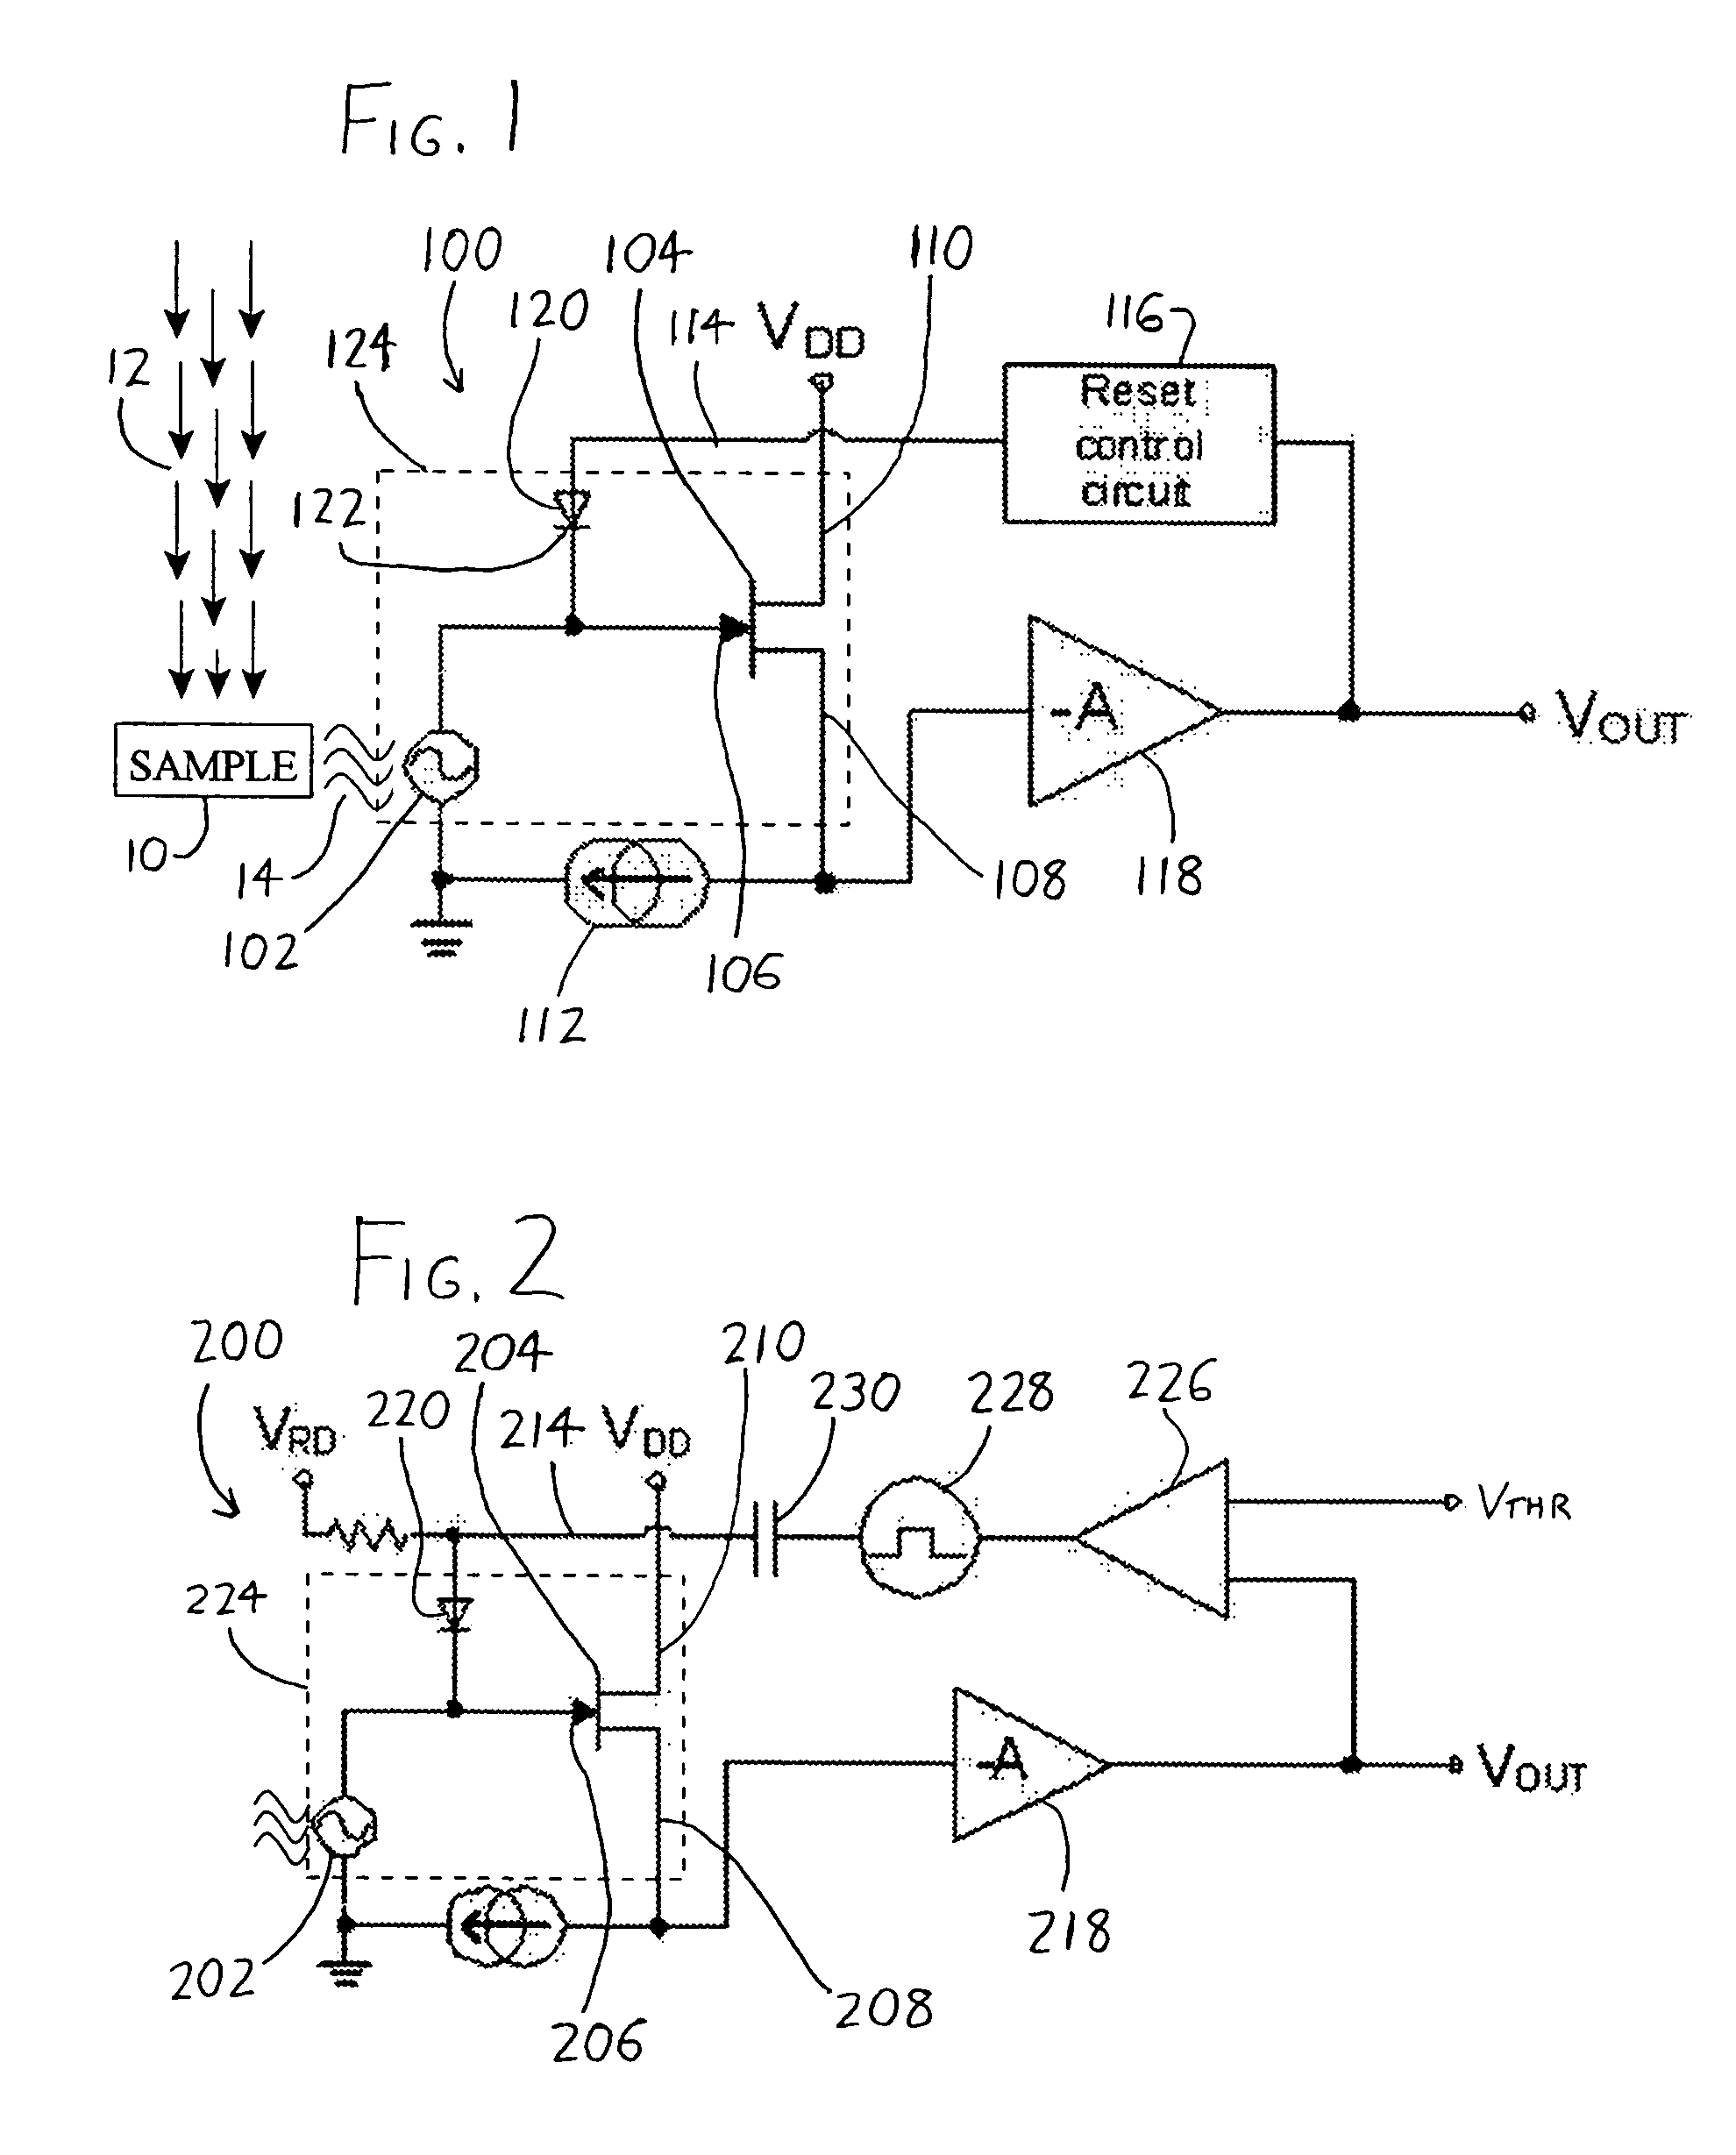 Feedback circuit for output control in a semiconductor X-ray detector